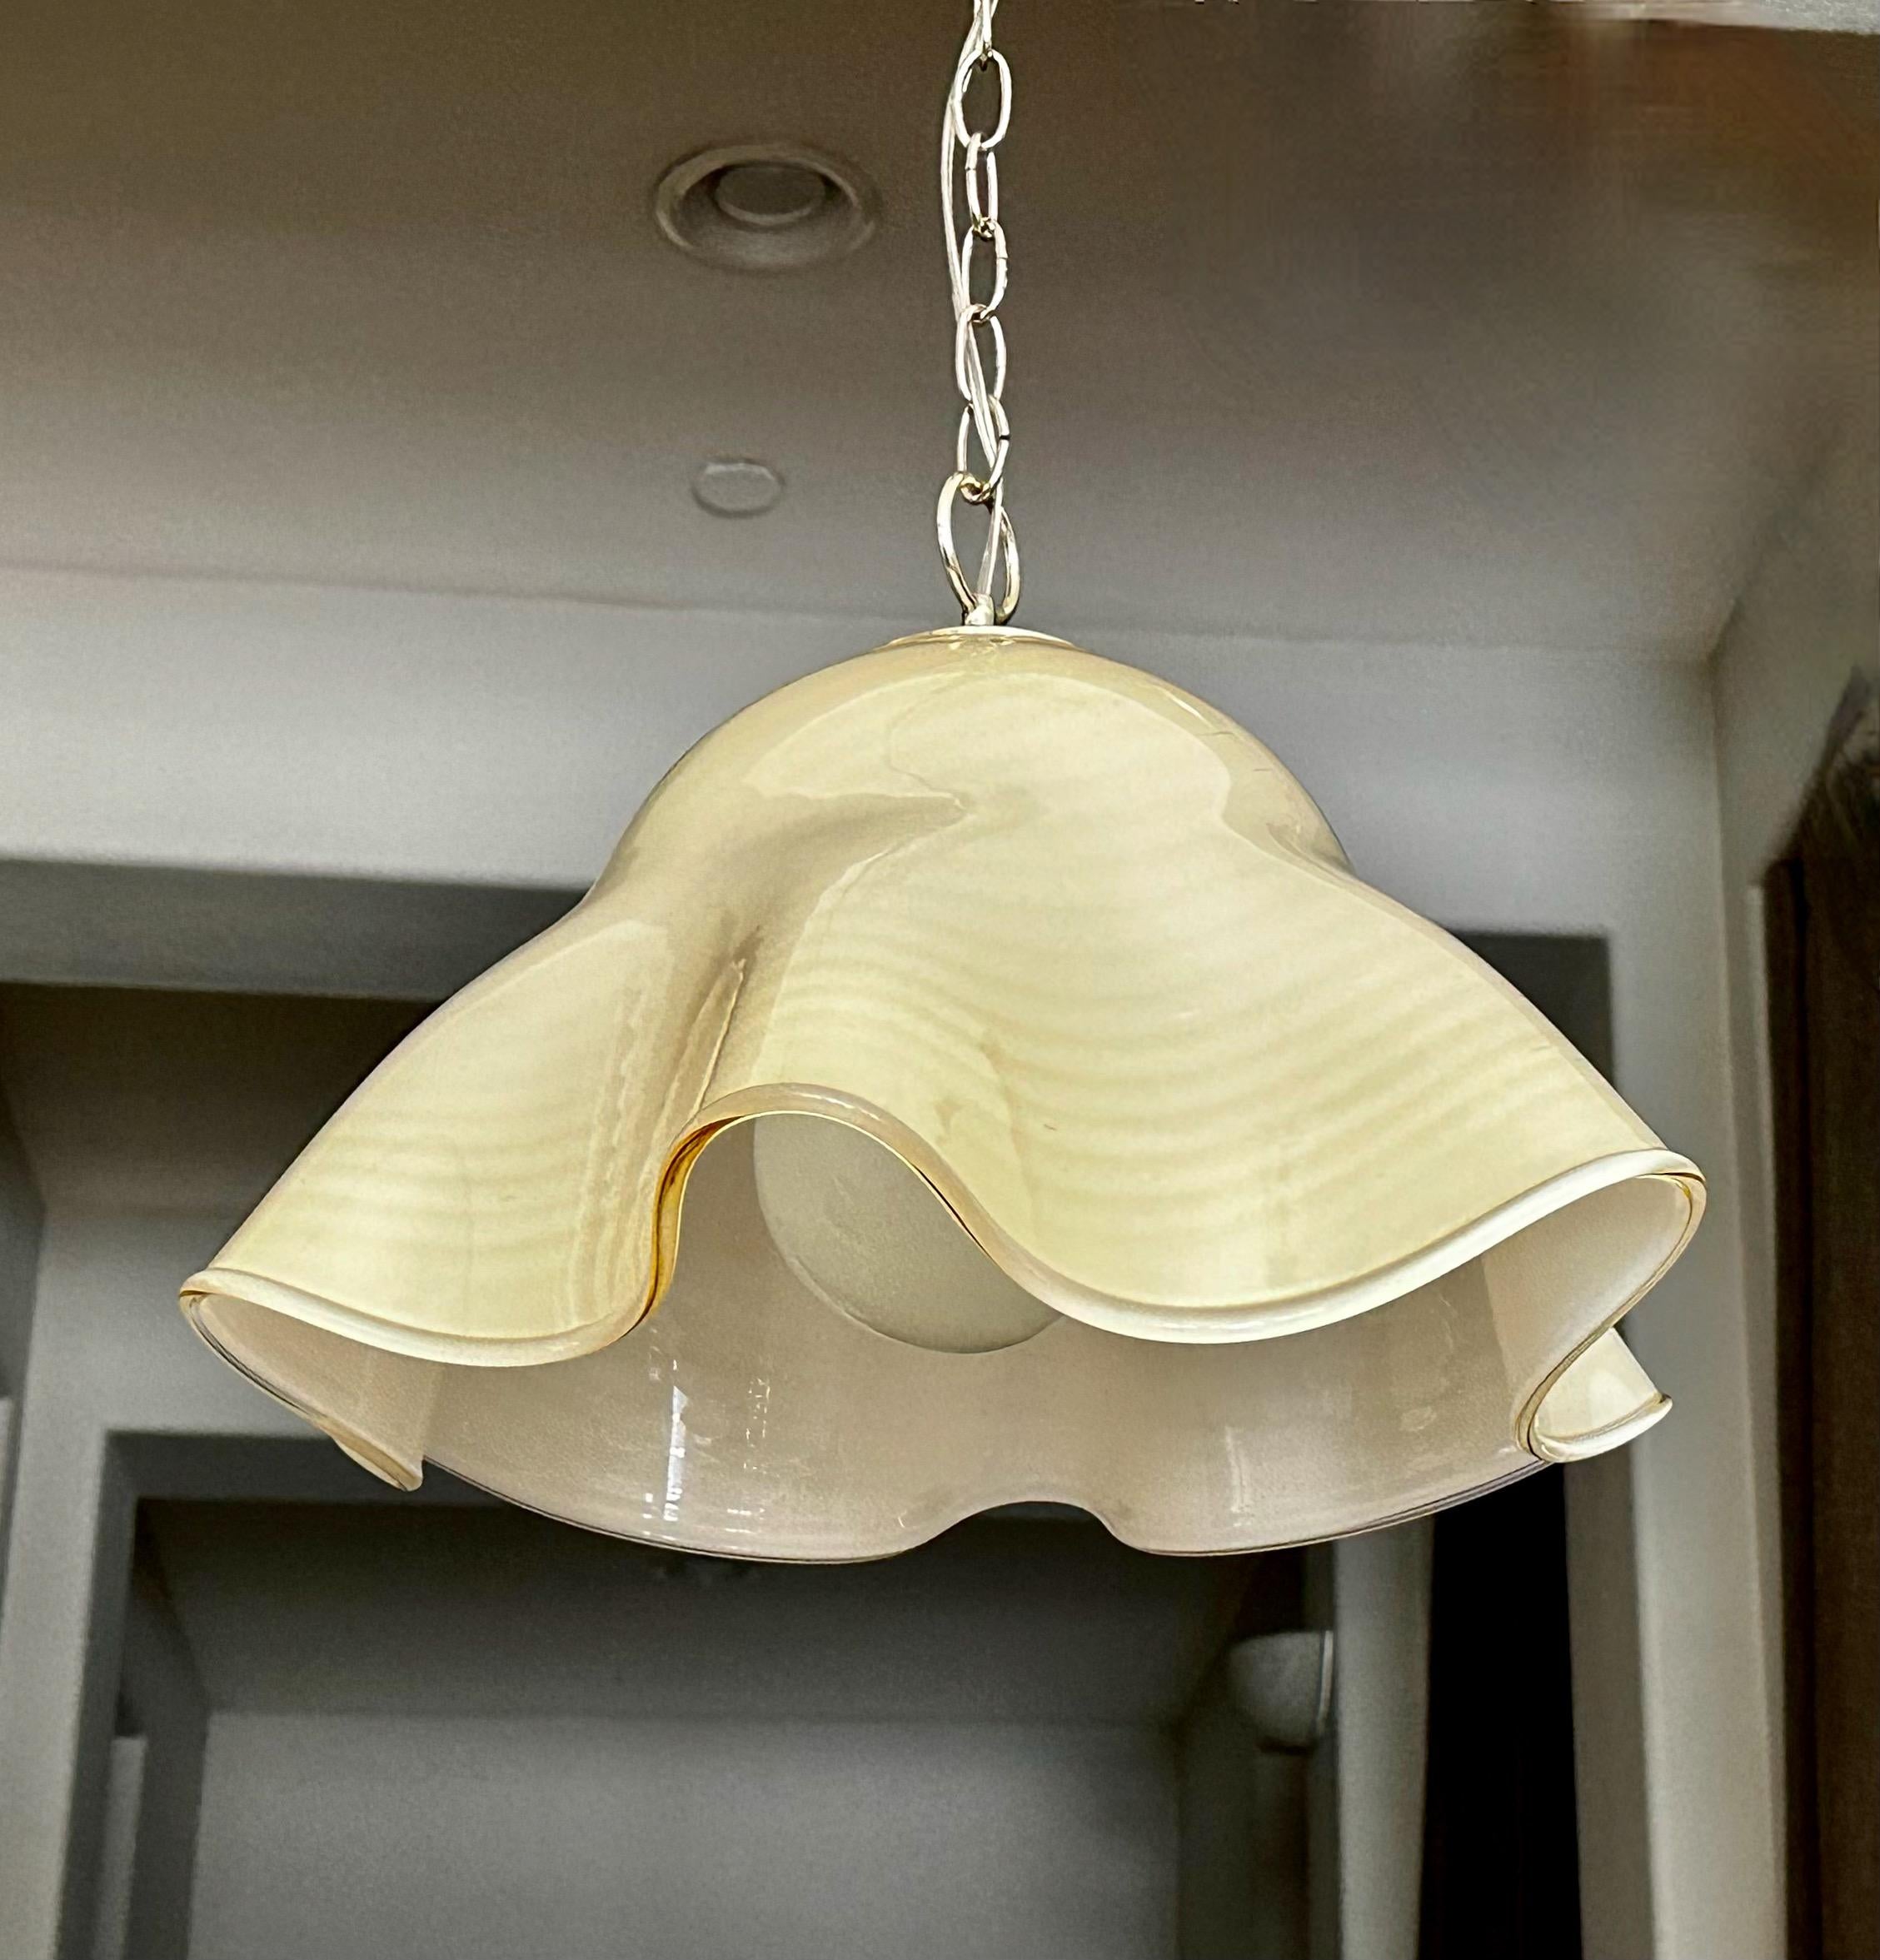 Italian Murano handkerchief shaped pendant ceiling light with chrome hardware. Murano cased glass body is creamy pale butterscotch with subtle slightly darker stripes. Uses regular A base bulb. Perfect for hall, entry or breakfast eating area.